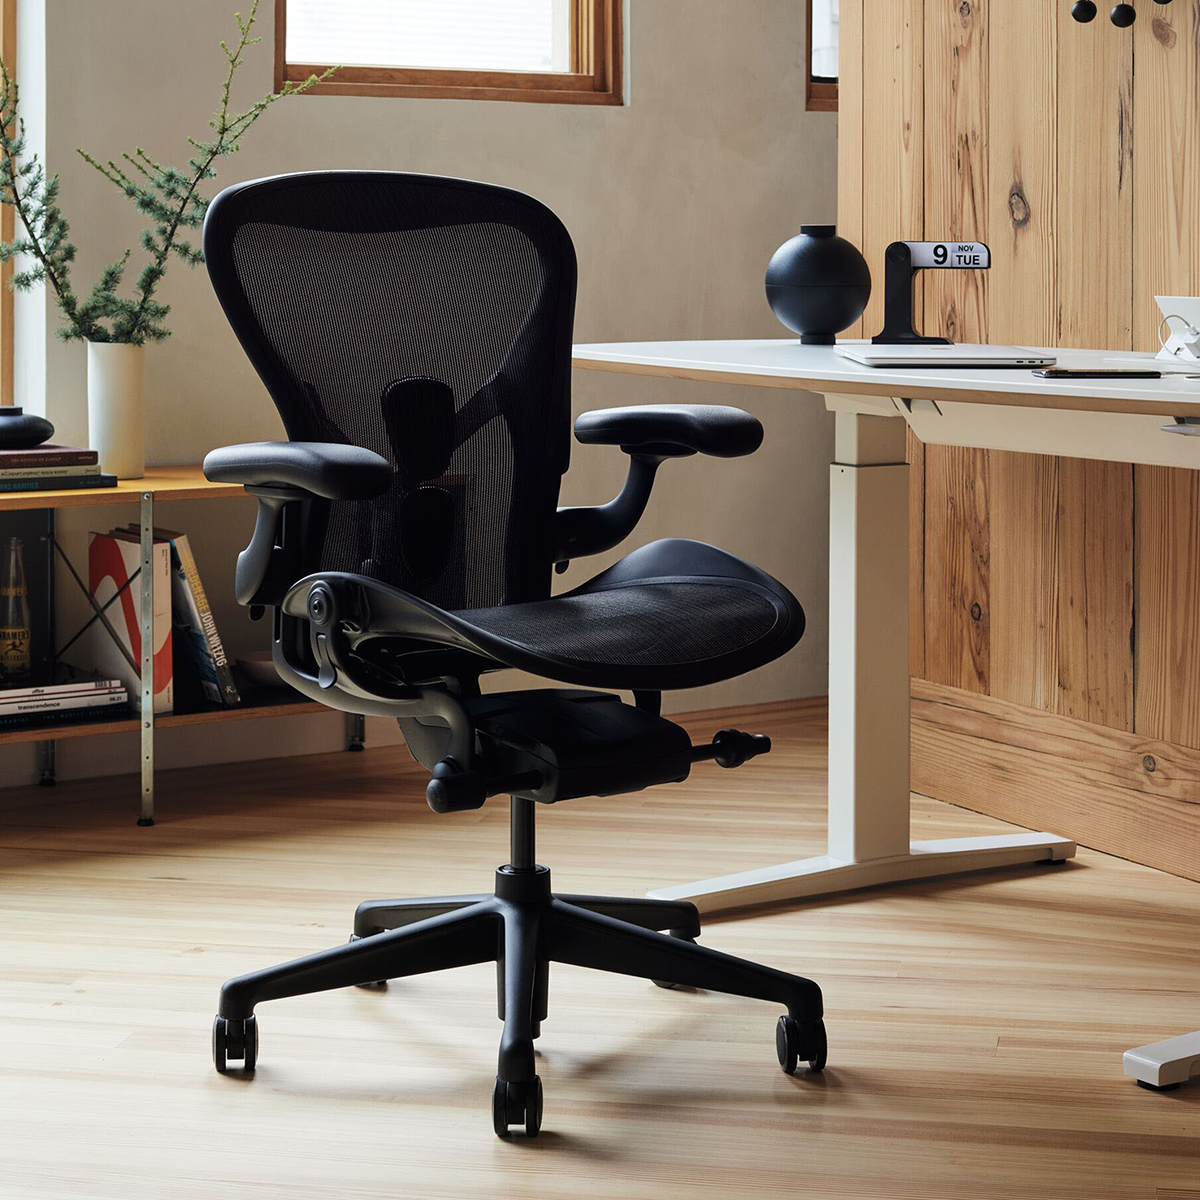 Office space with Aeron Chair.